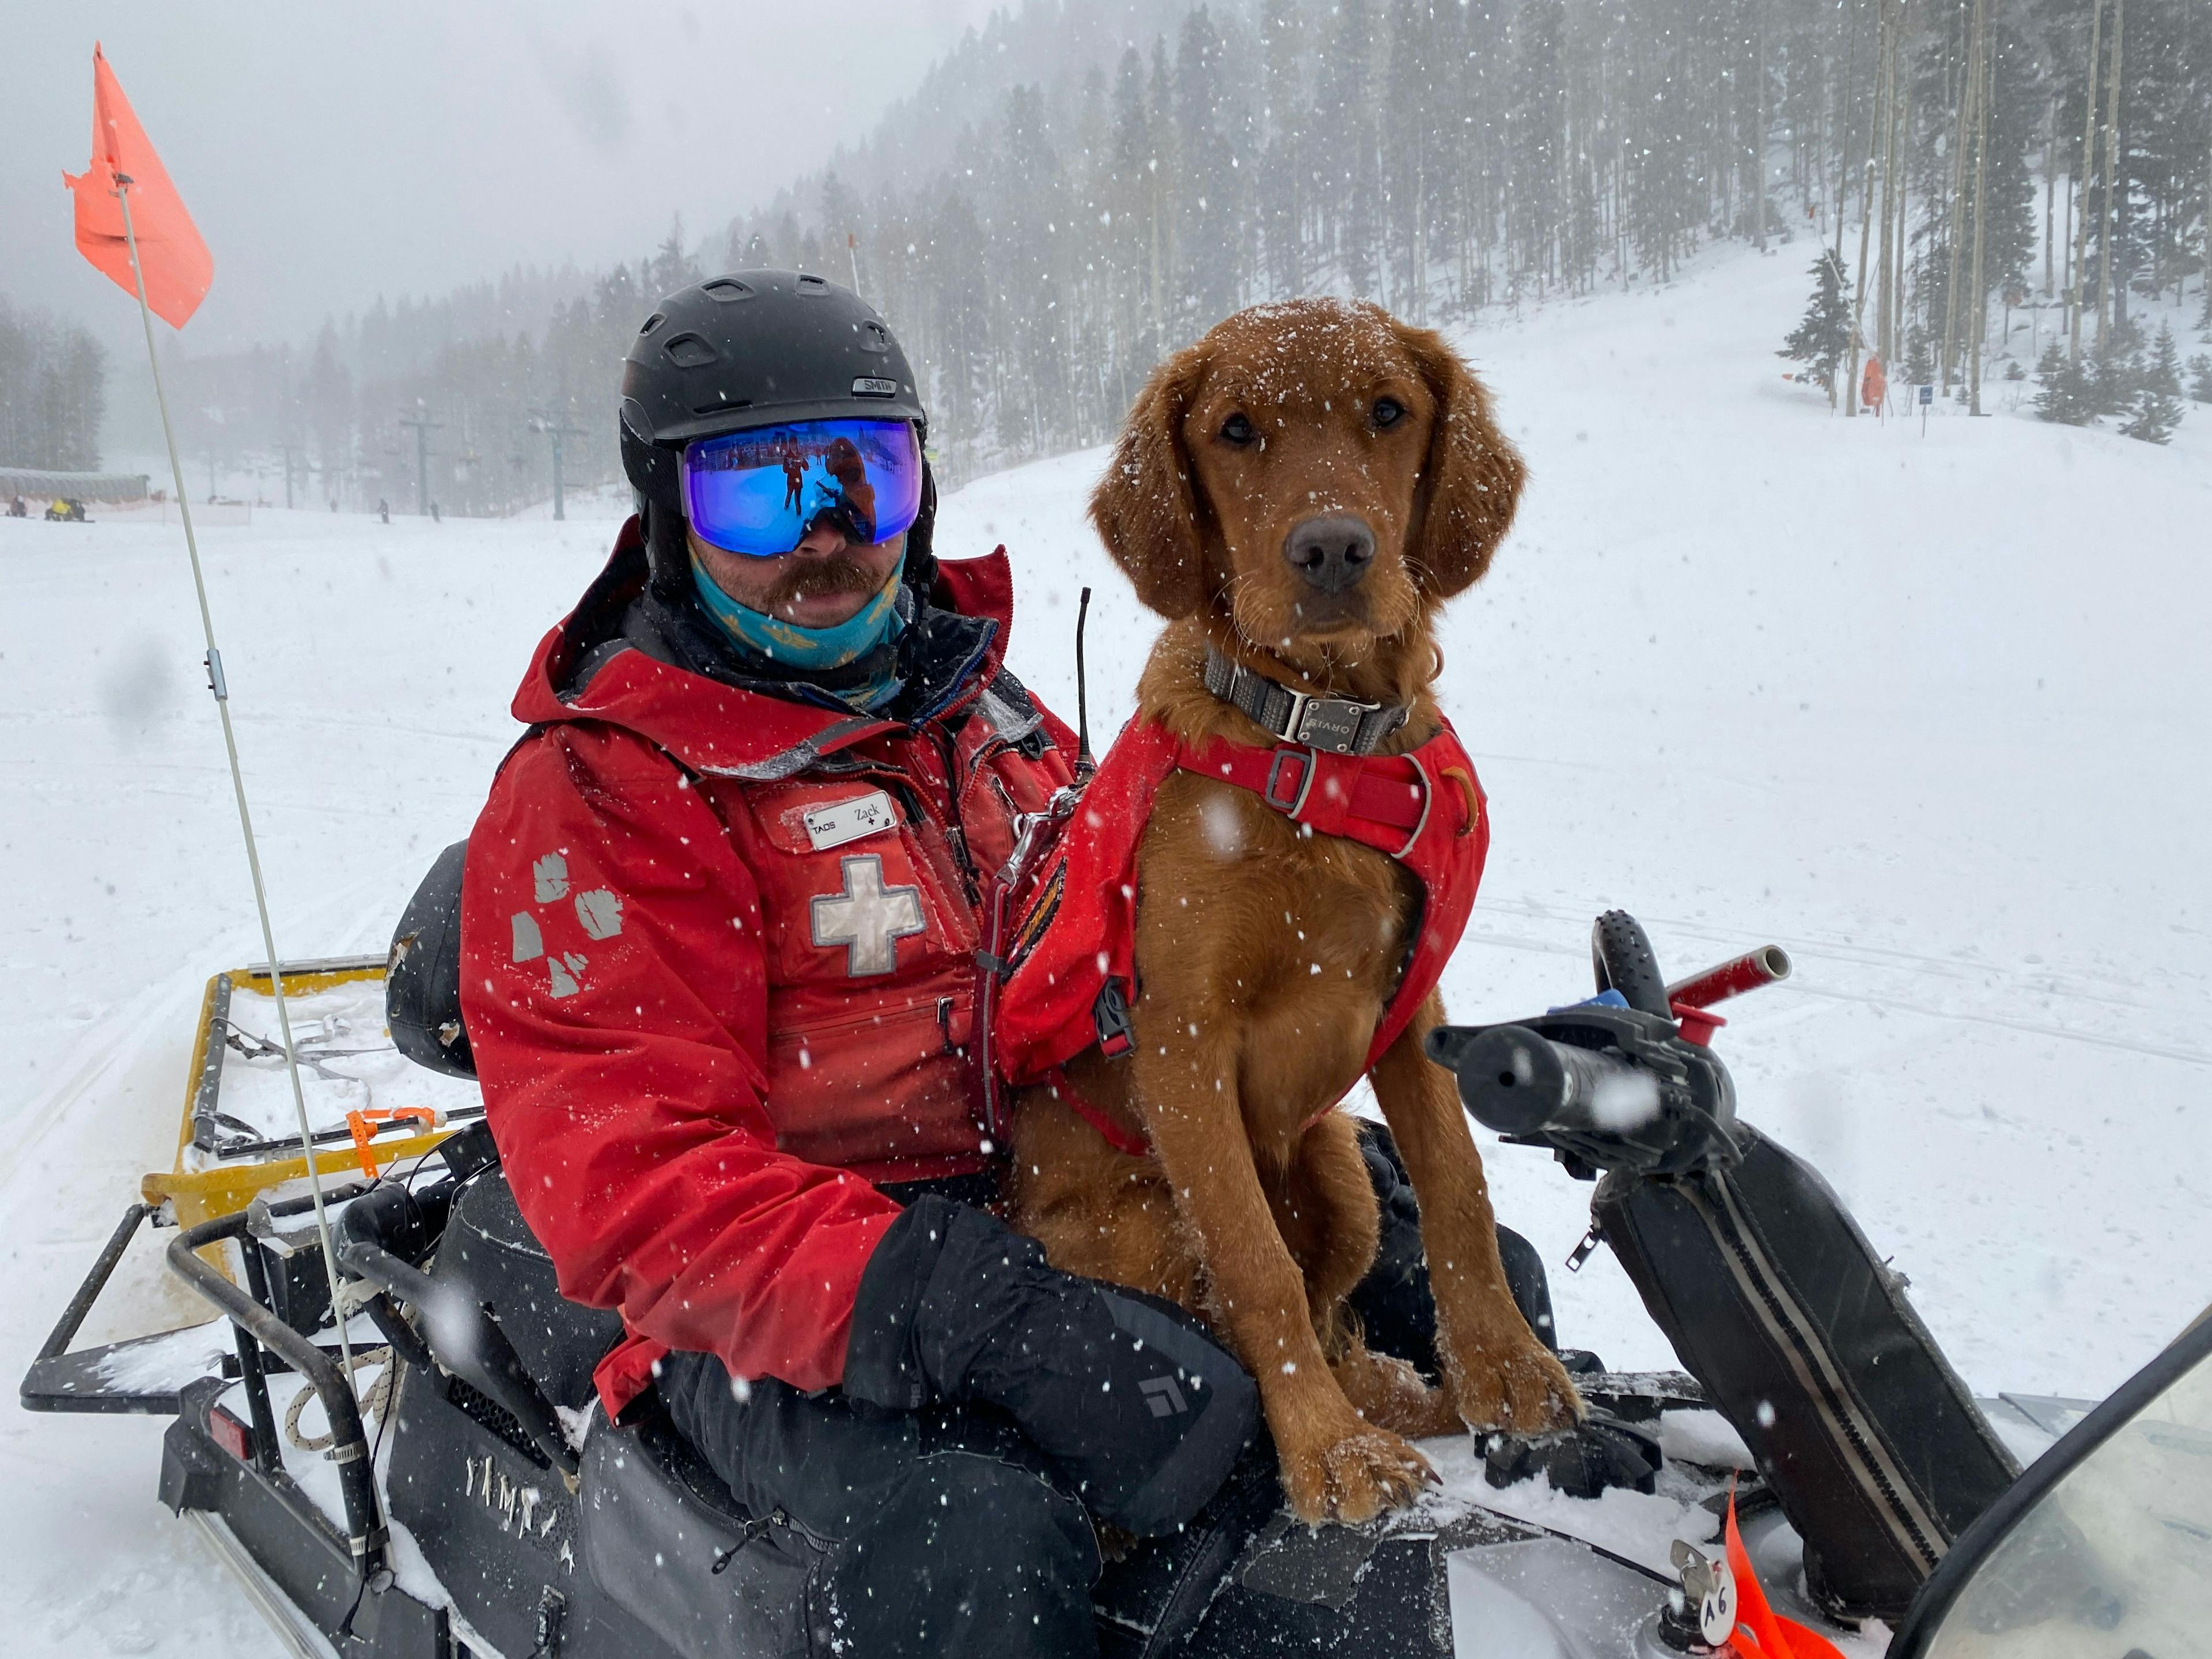 Ski patroller and patrol dog on a snowmobile being super cute